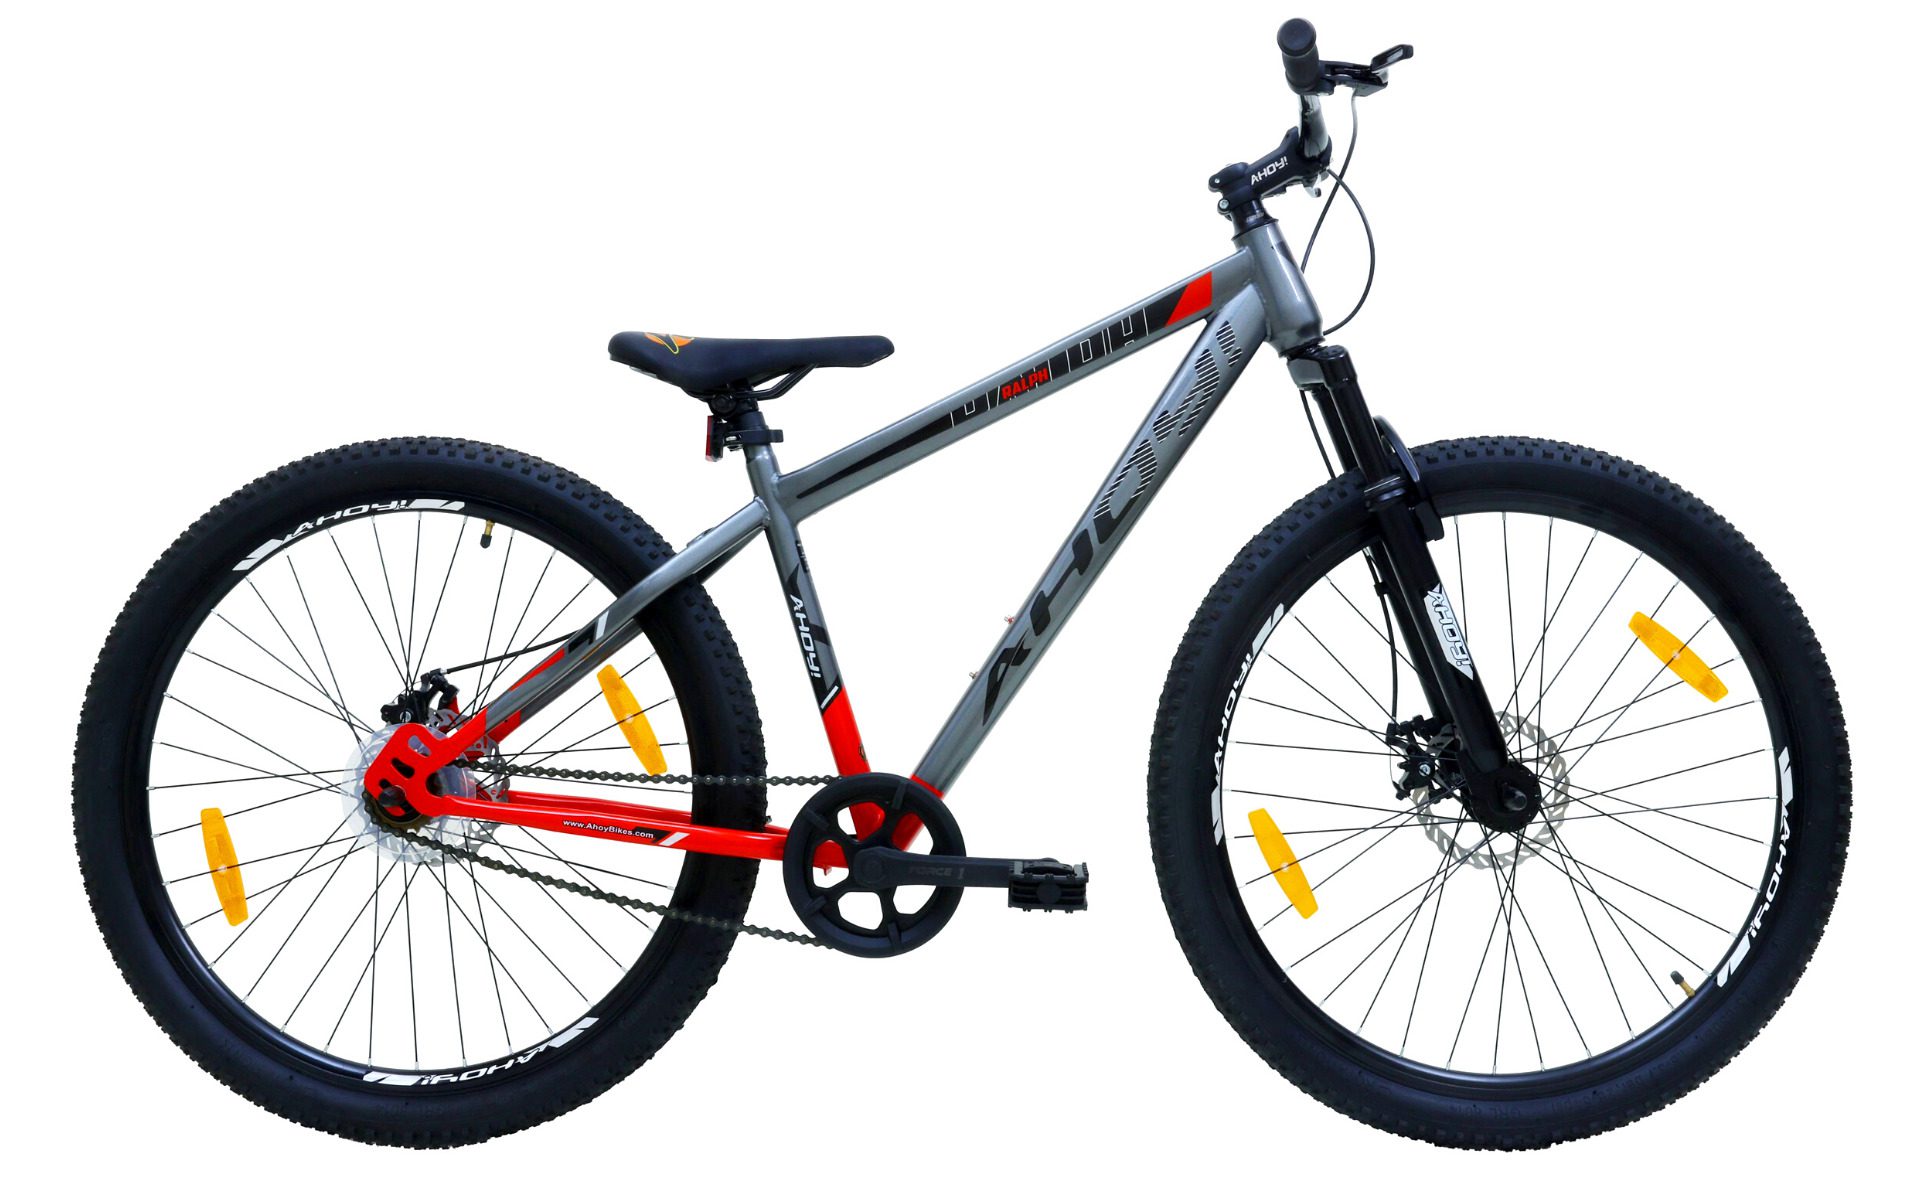 Ralph Single Speed Cycle 27.5T | Buy Red Non Gear Bike for Men